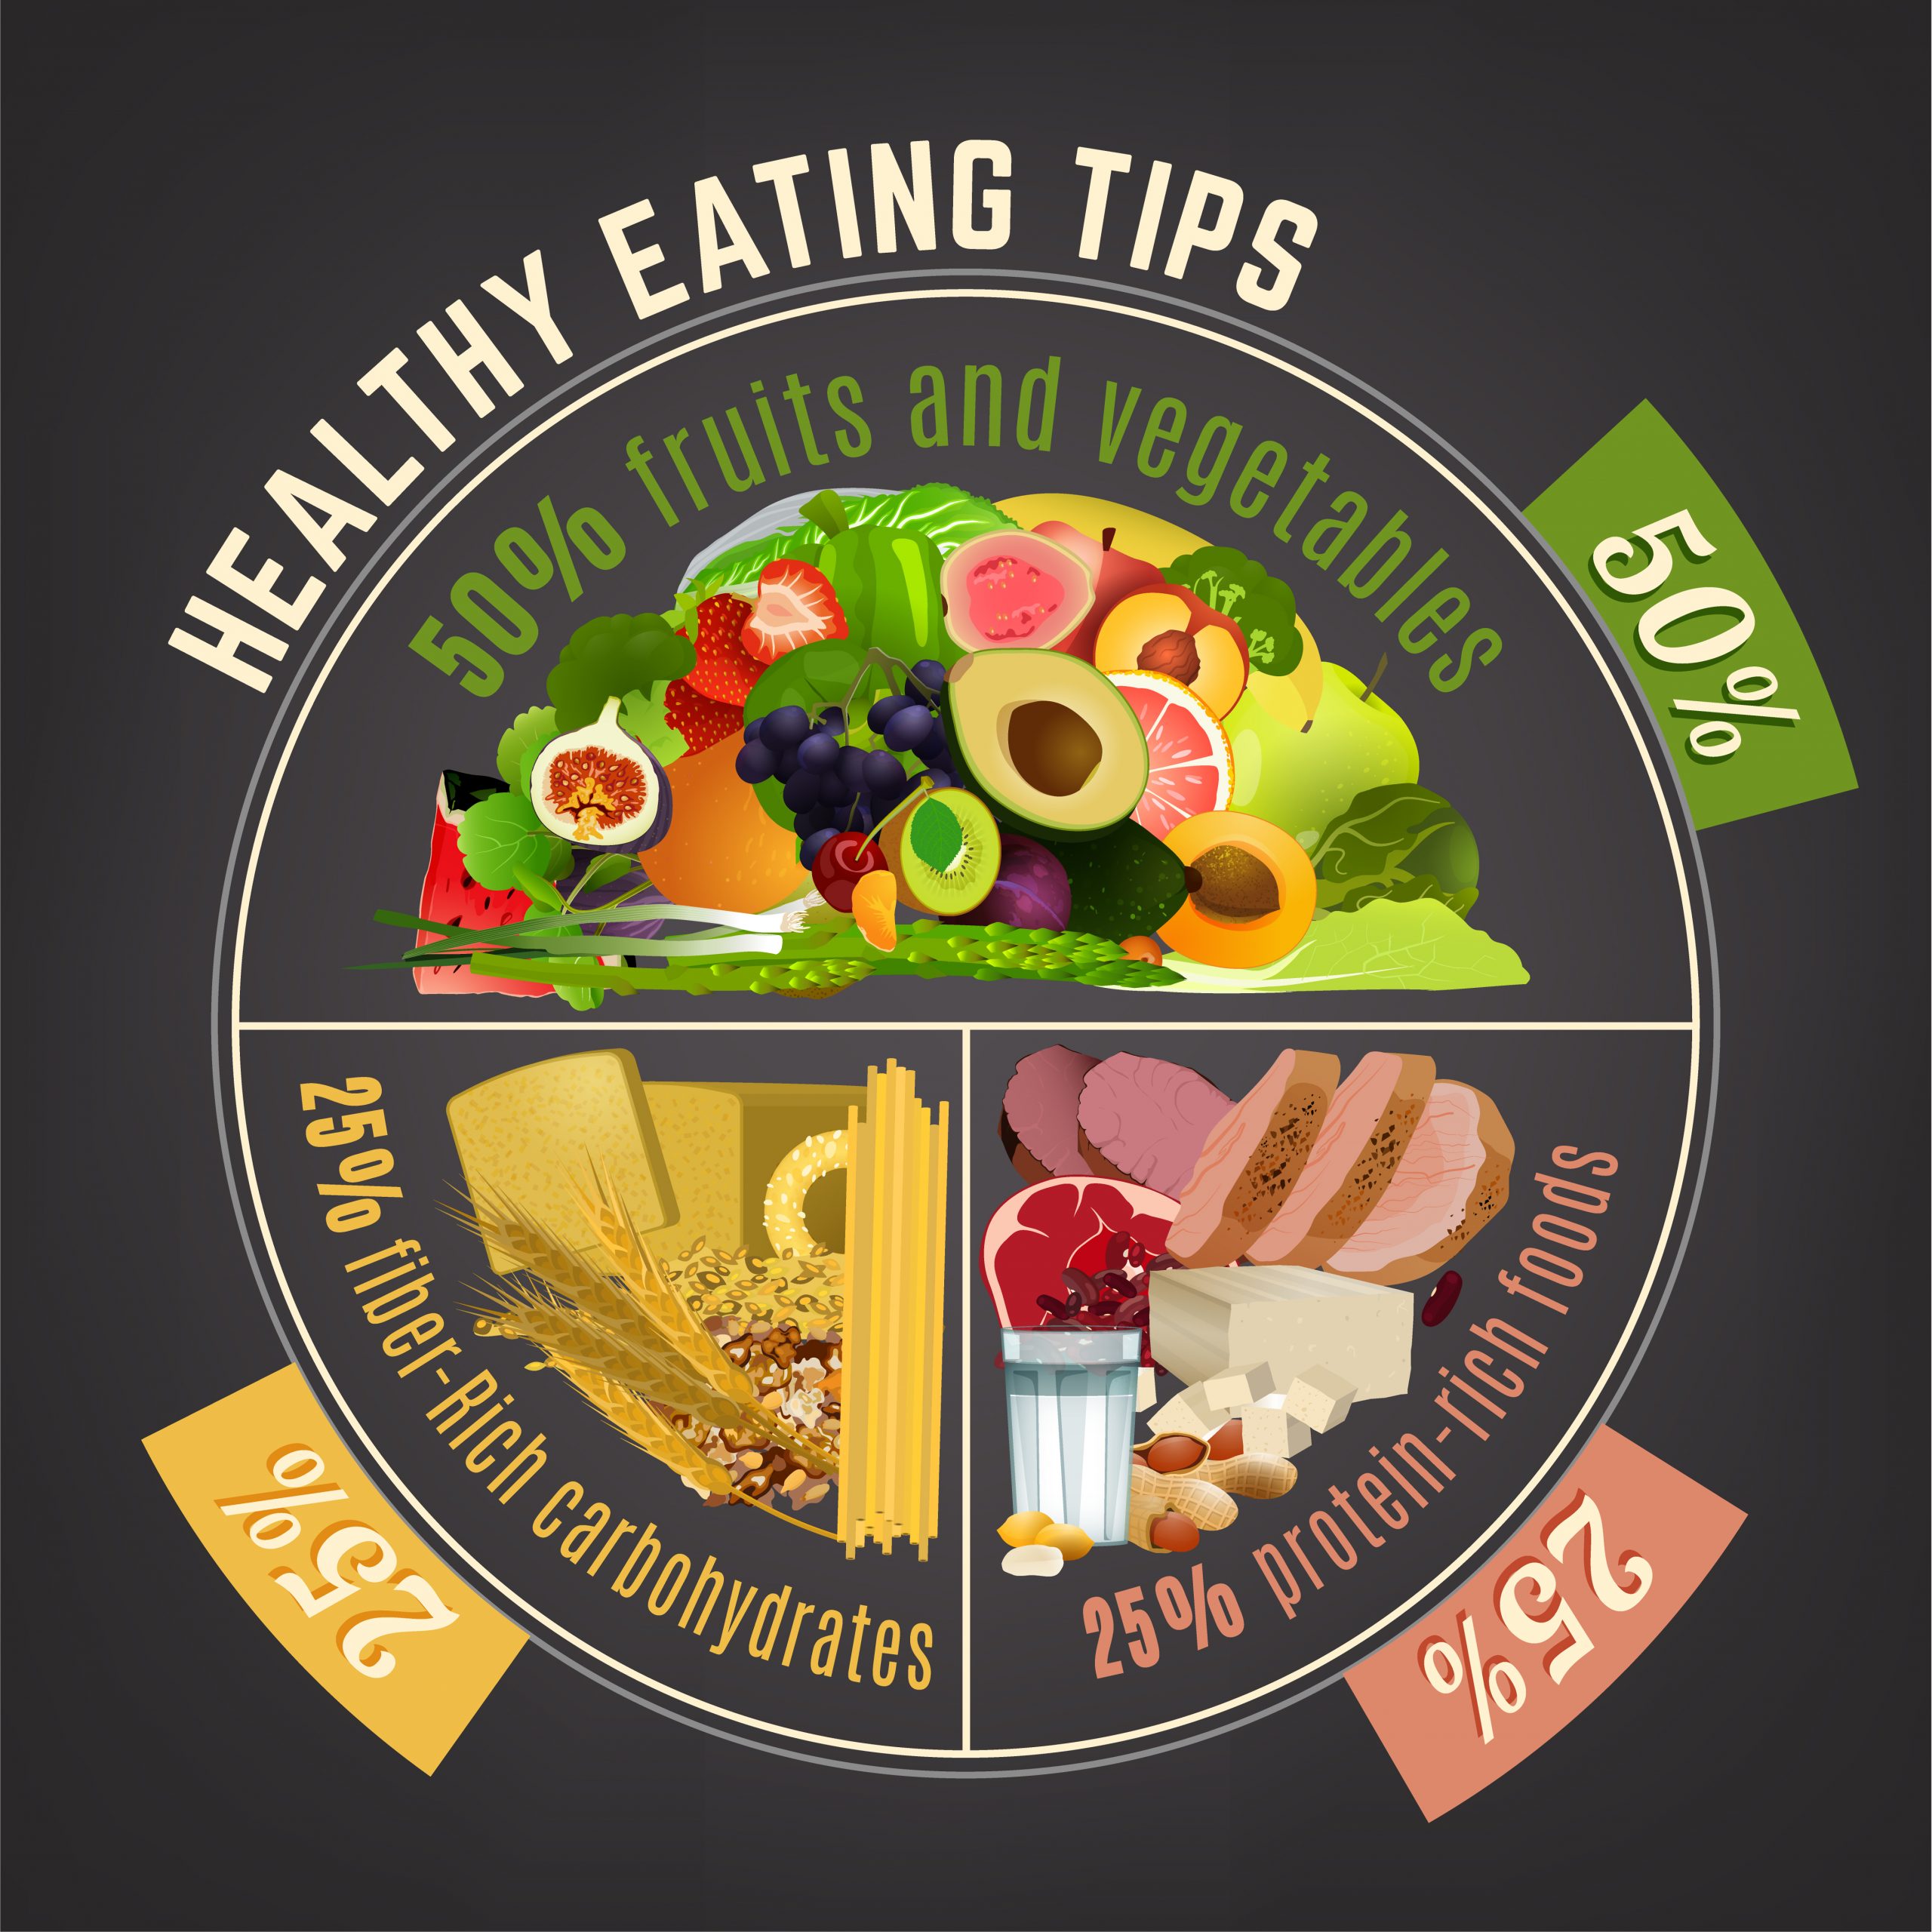 Example of a healthy eating plate